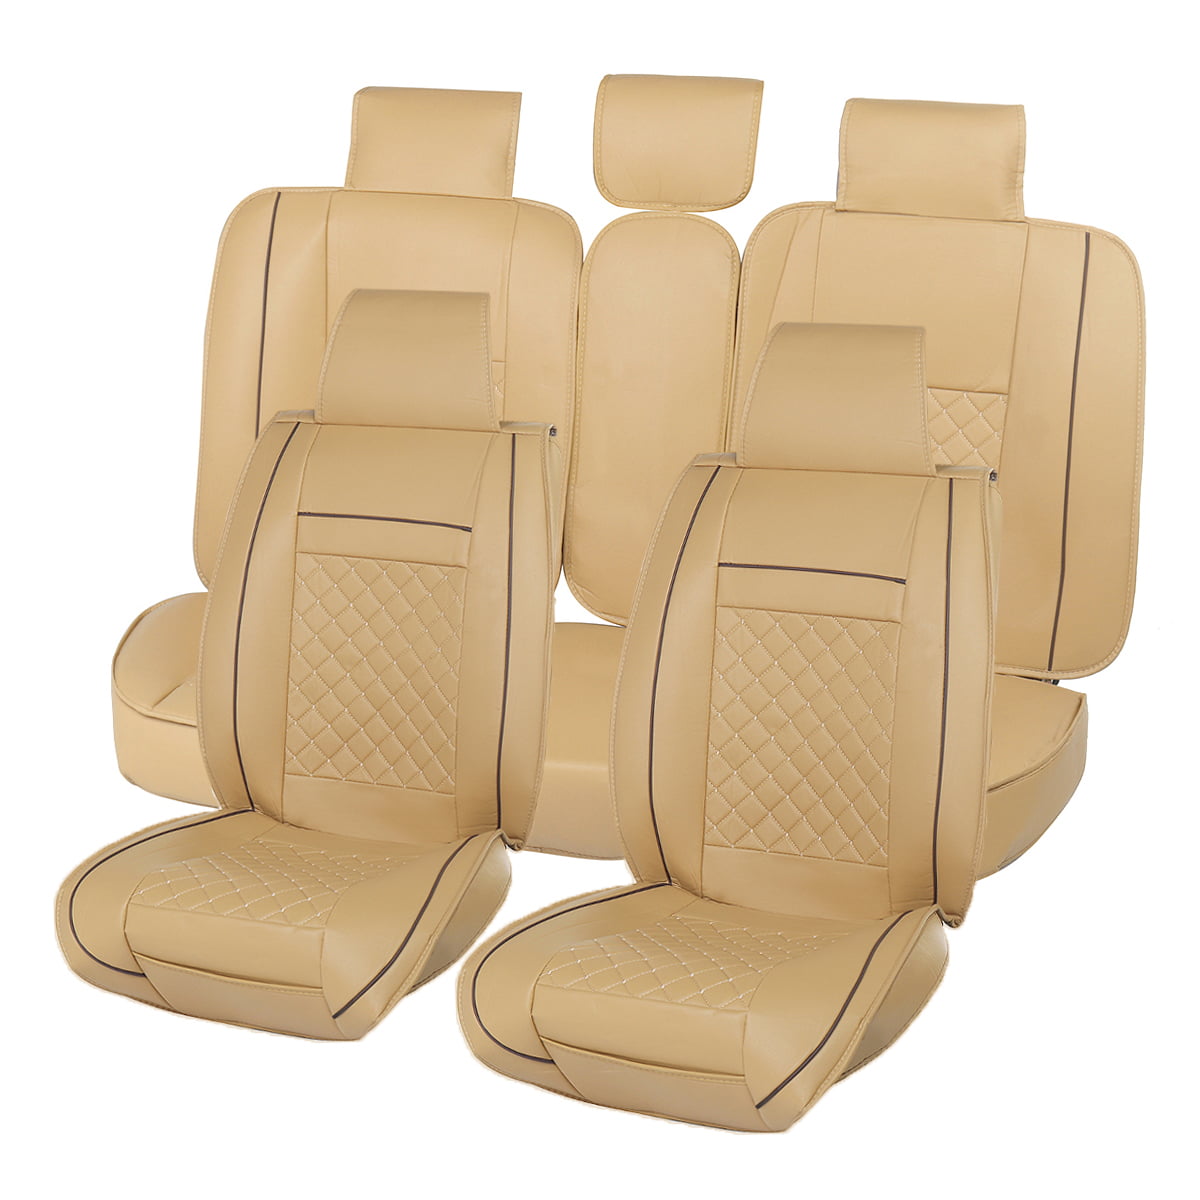 1/5 Seats Universal Car Seat Covers Full Set, Waterproof PU Leather Car Seat Covers, Front and Rear Split Bench Protection, Easy to Install, Universal Fit for Auto Truck Van SUV